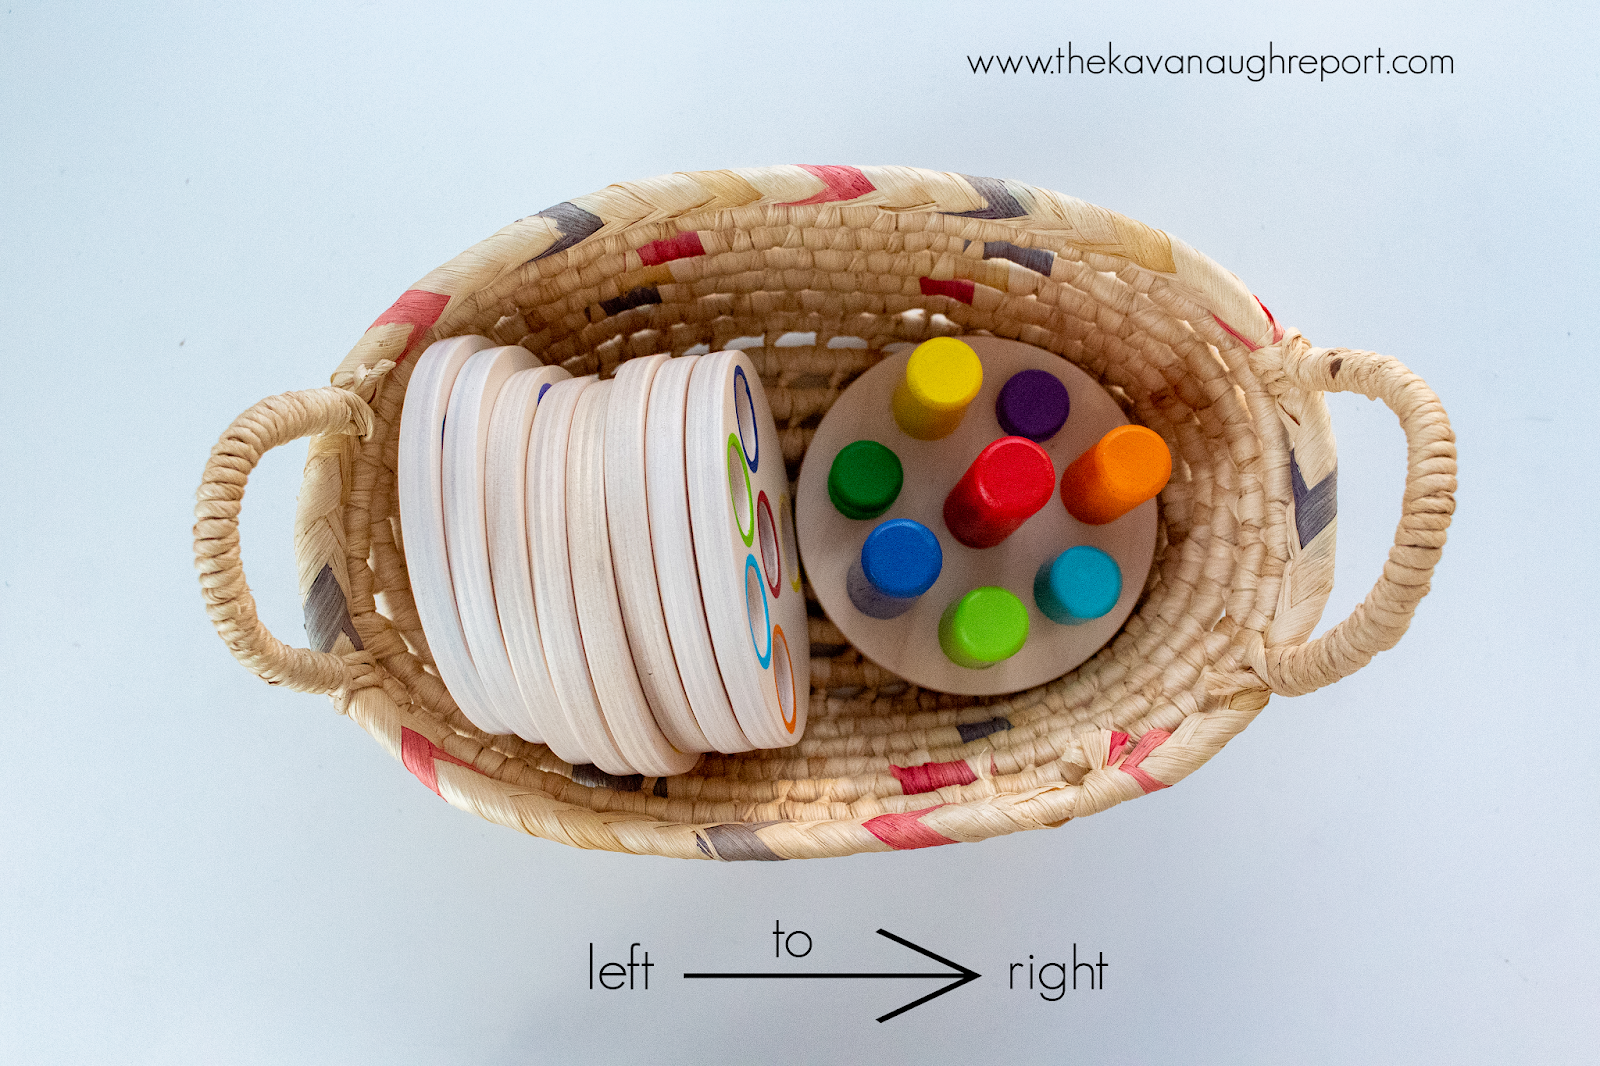 4 simple tips to present common toys and games in a Montessori way